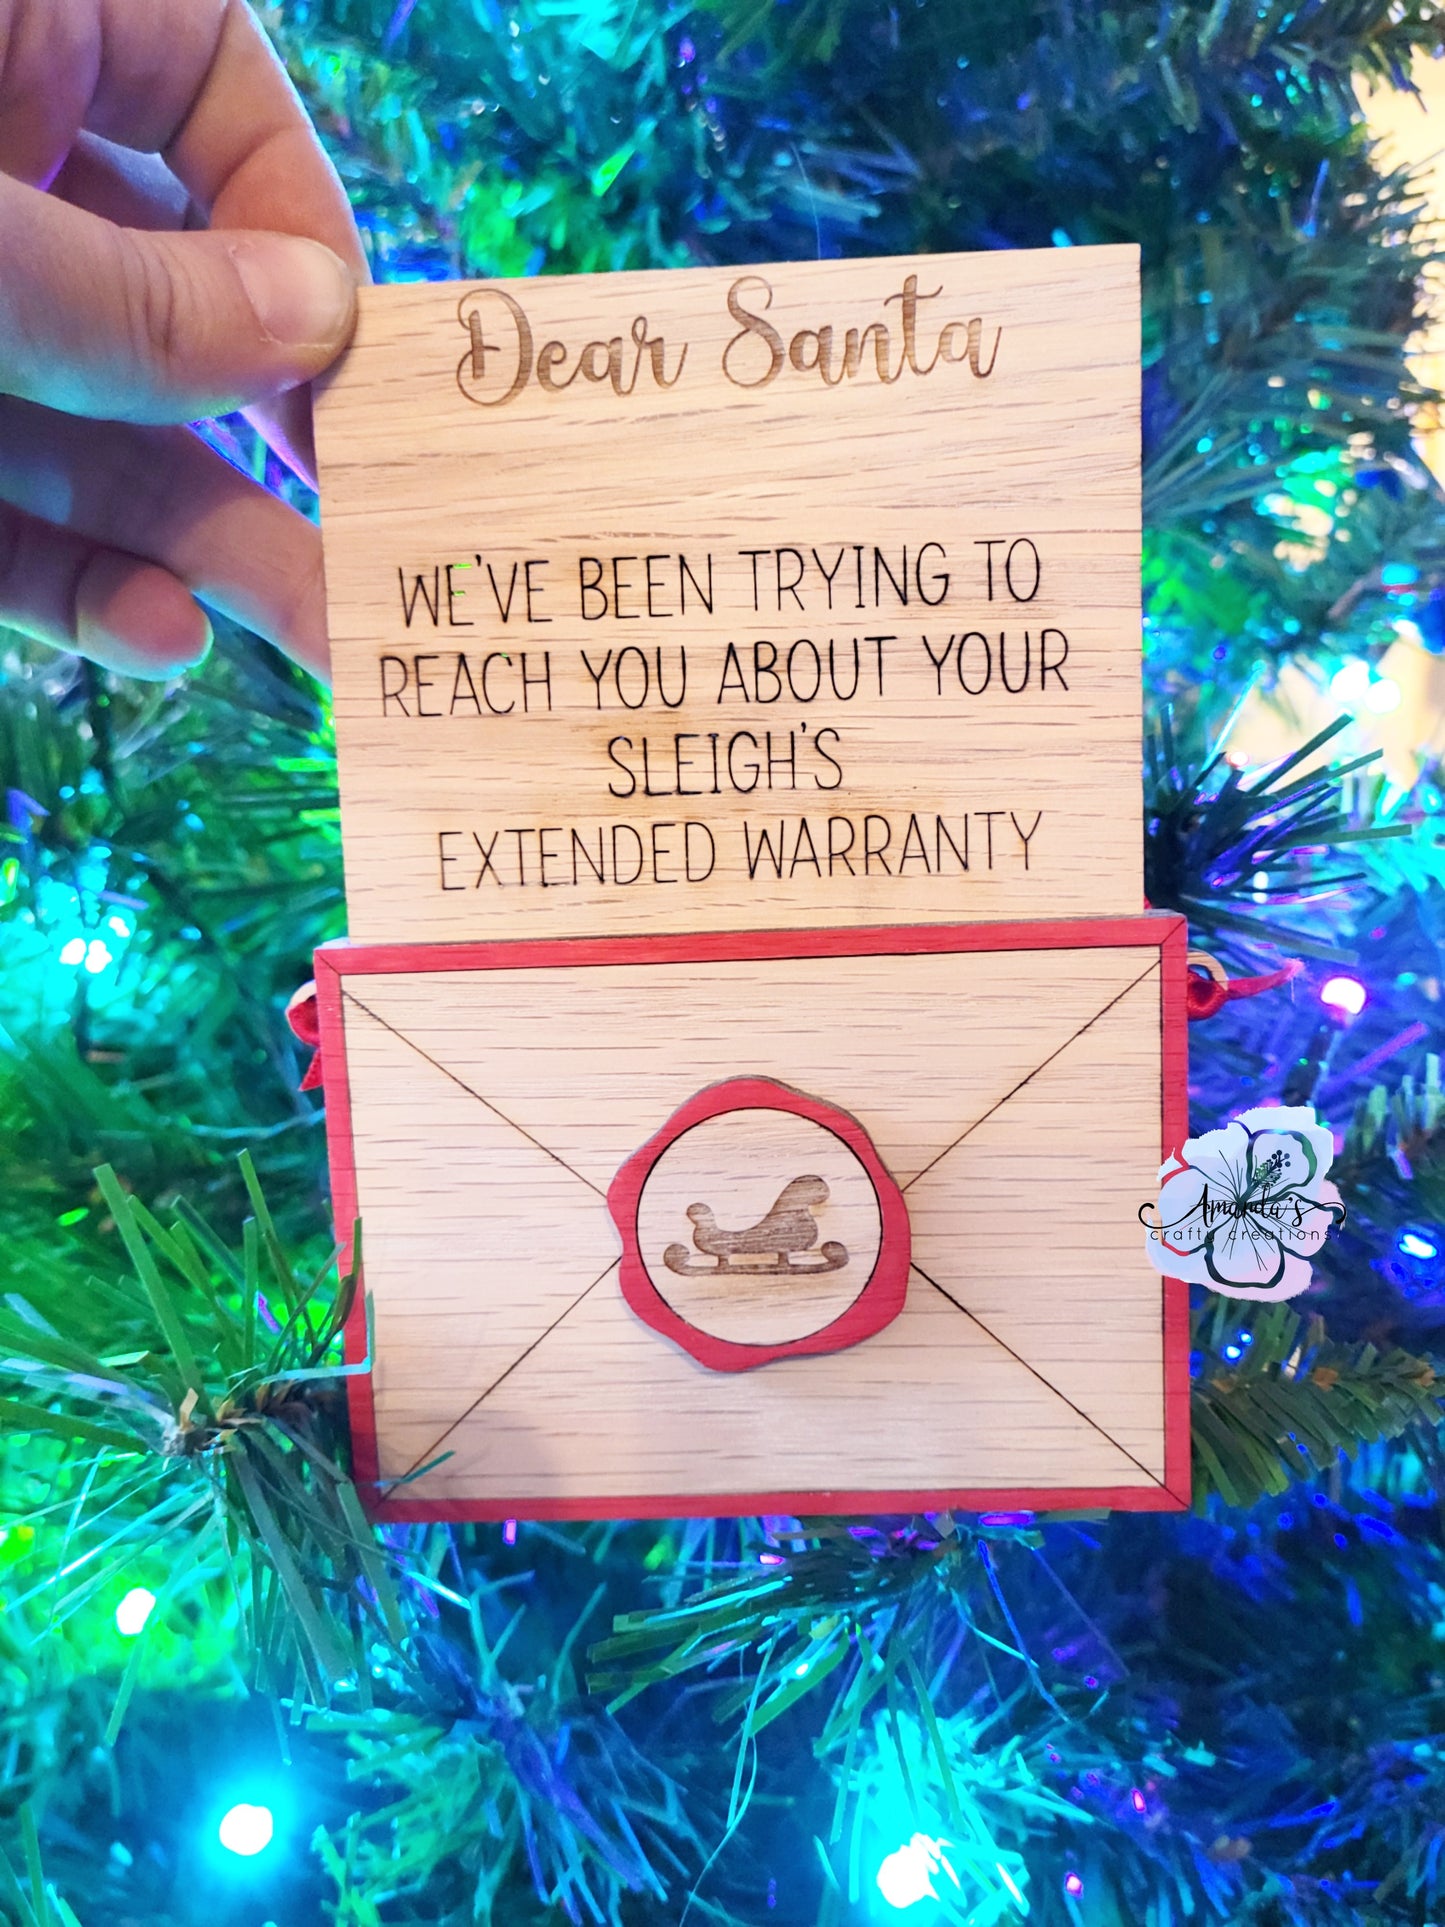 "Dear Santa" funny layered ornament, sleigh's extended warranty, gag gift, 2021, white elephant, layered ornament, adult humor, funny ornament